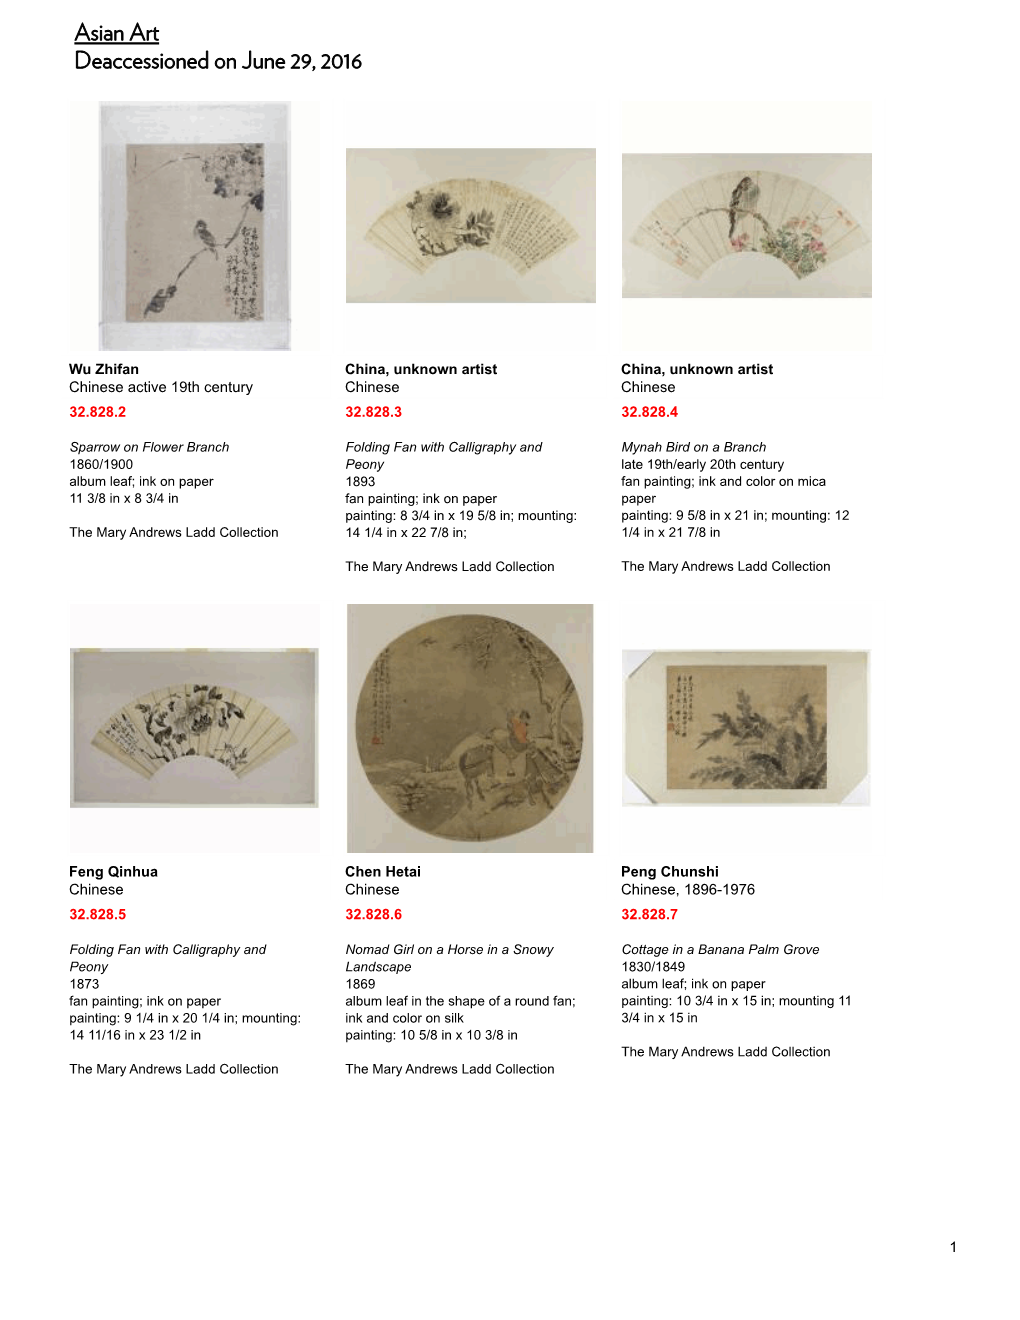 Asian Art Deaccessioned on June 29, 2016